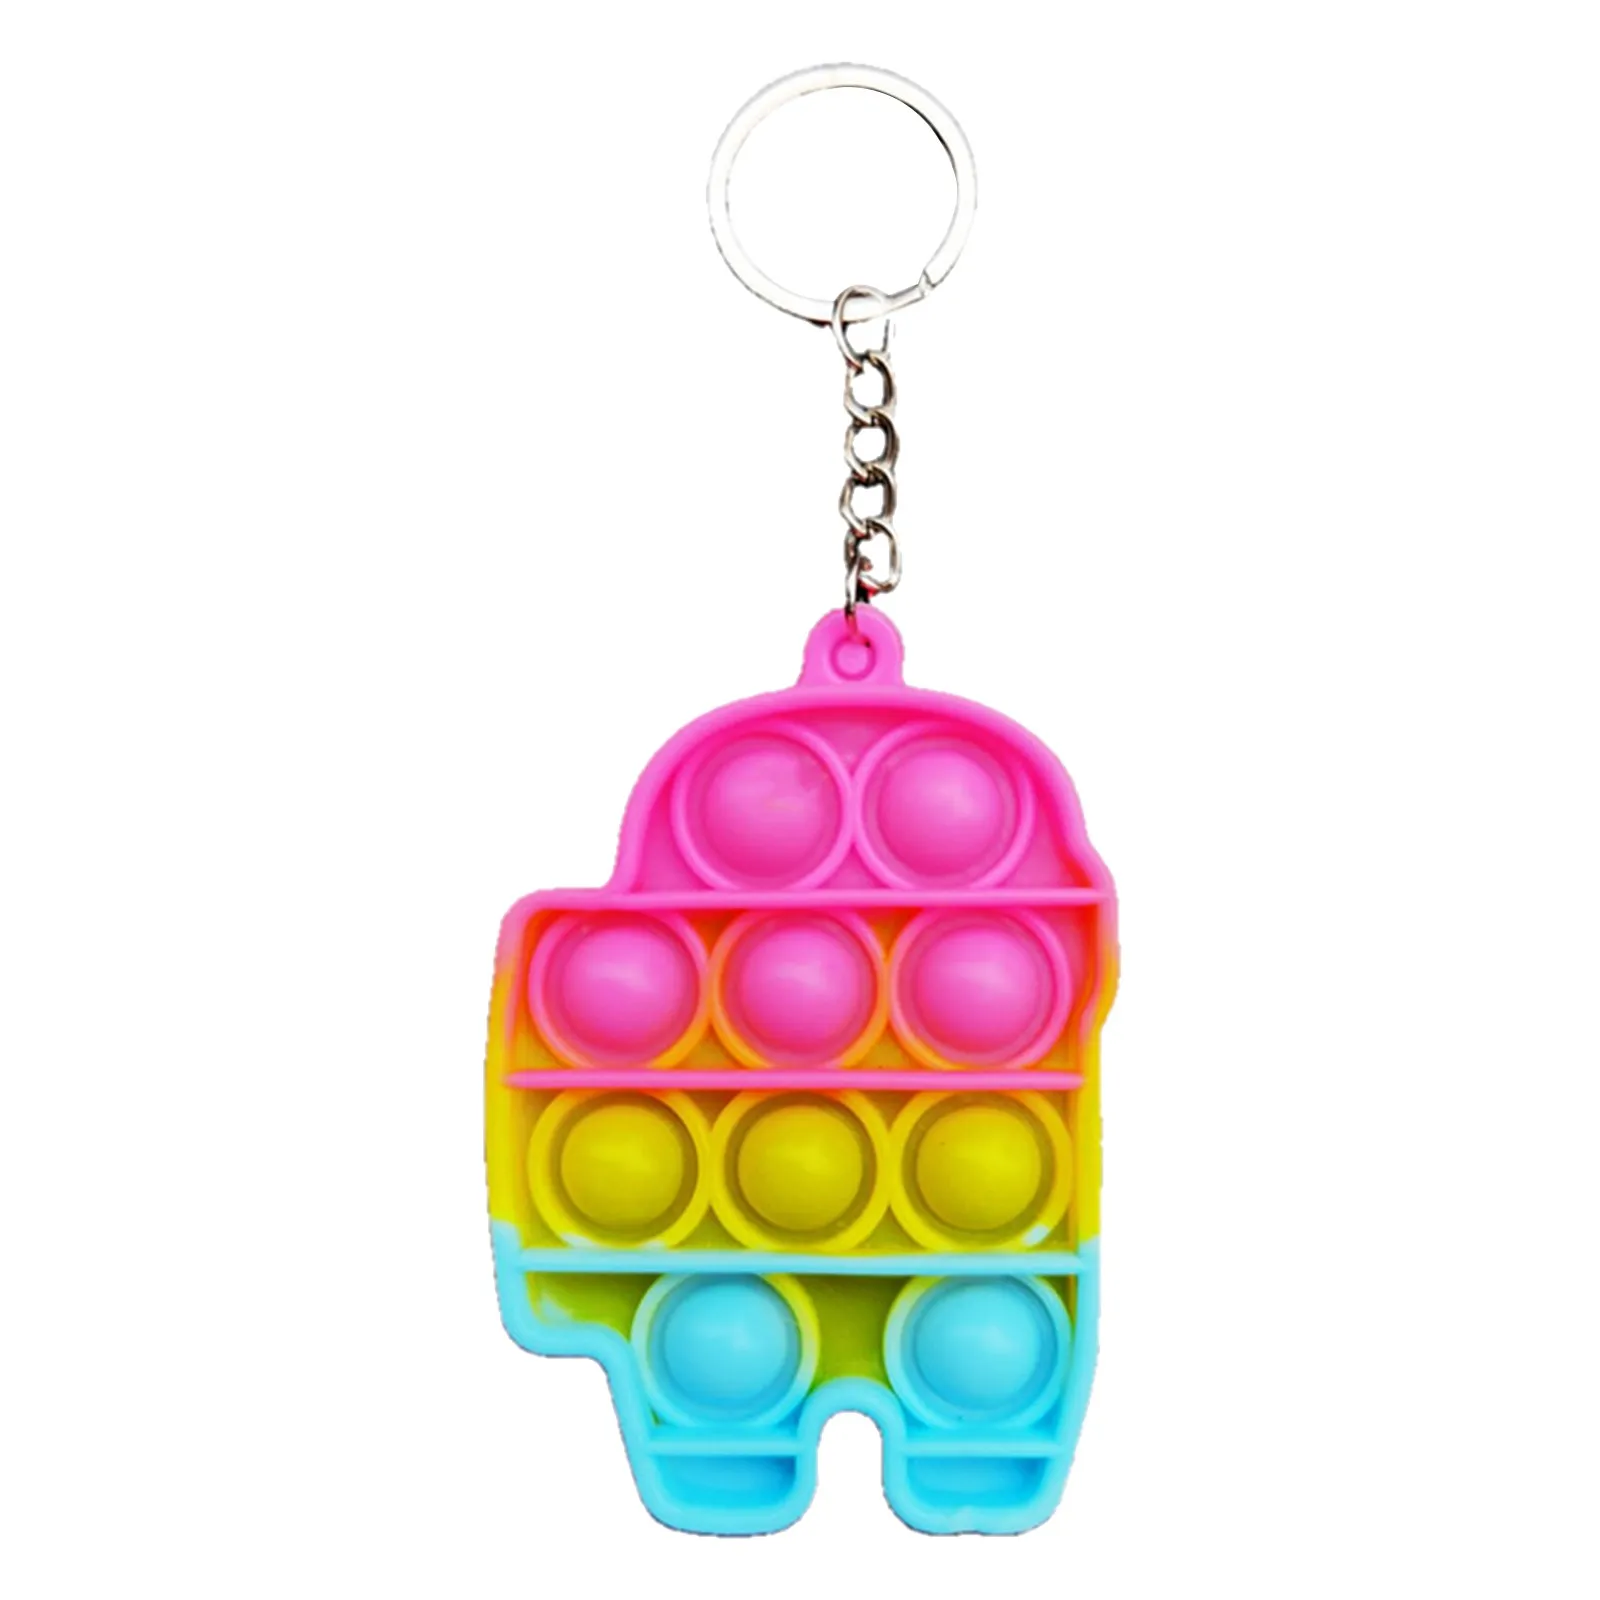 New push pops its mini keychain dinosaur simple dimple fidget toy for autism adhd anxiety anti stress relief edc sensory bubble atomic nee dohs Squeeze Toys